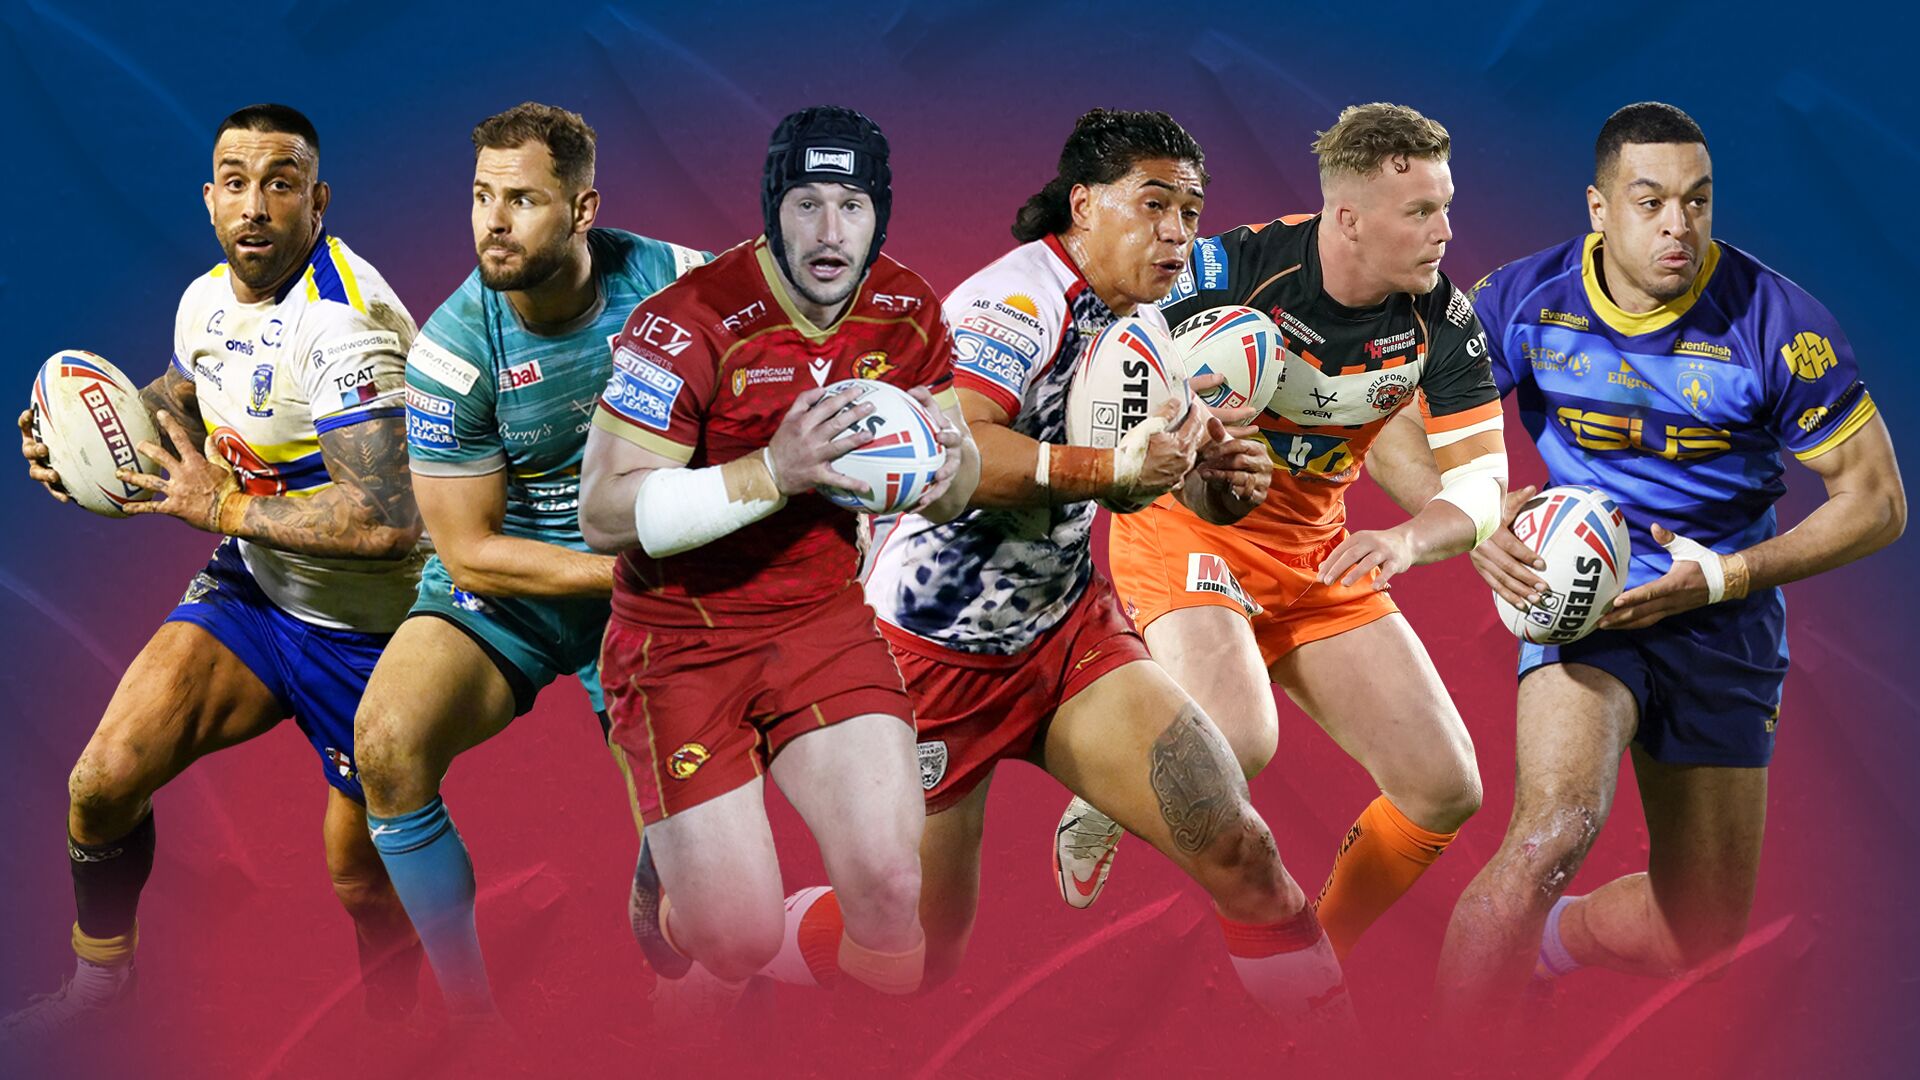 Watch Rugby League Live on Sky - Home of NZ Rugby League Sky